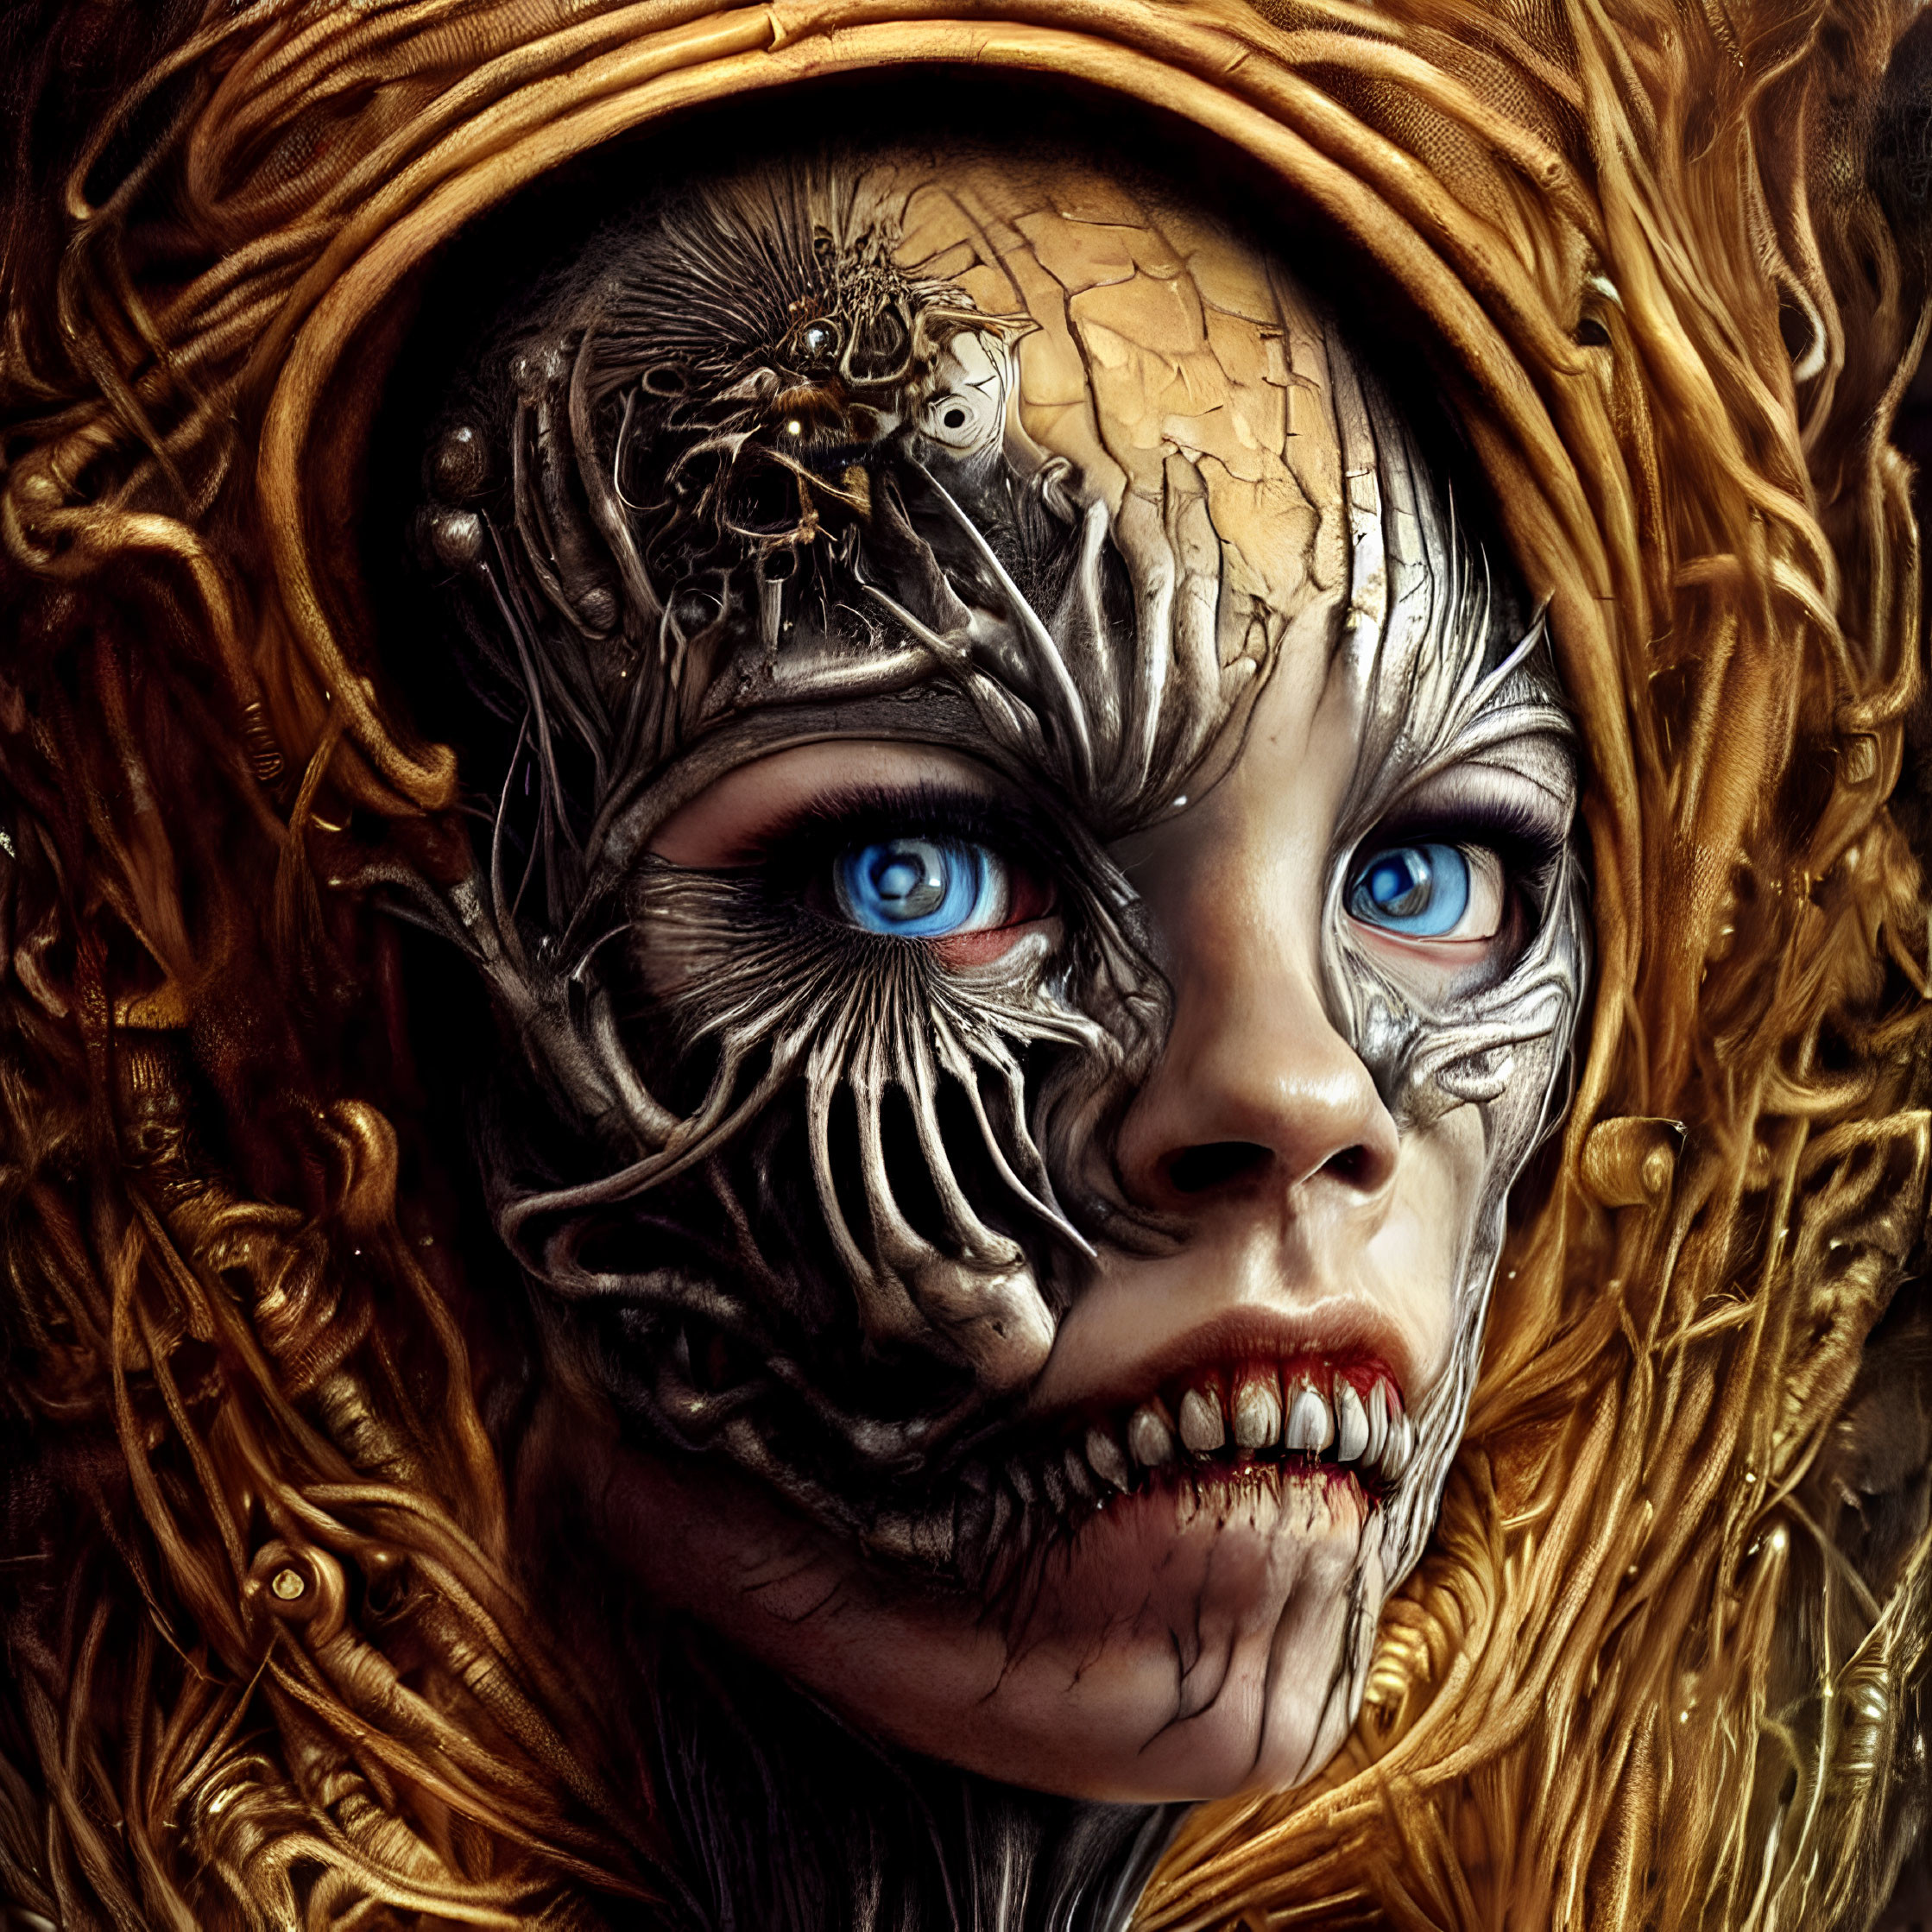 Fantasy portrait with human-meets-mechanical elements and gold accents